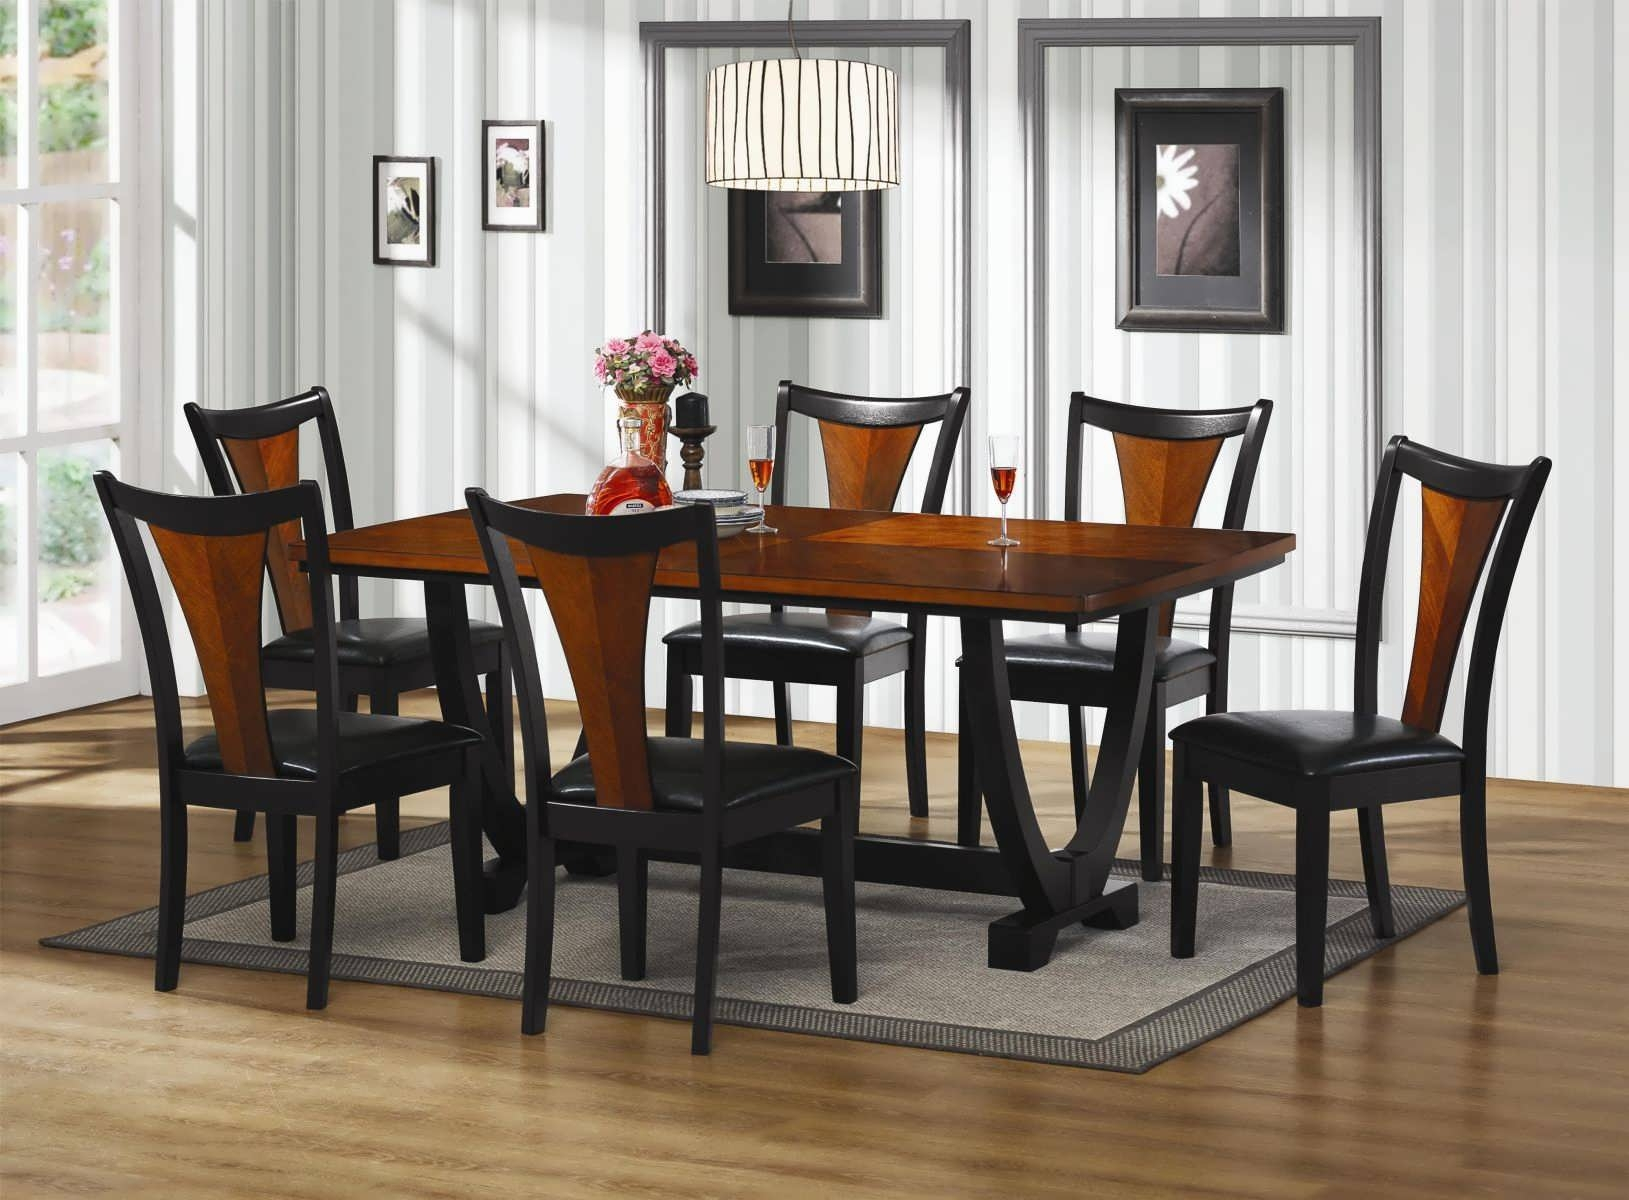 Argos Small Dining Room Table And Chairs